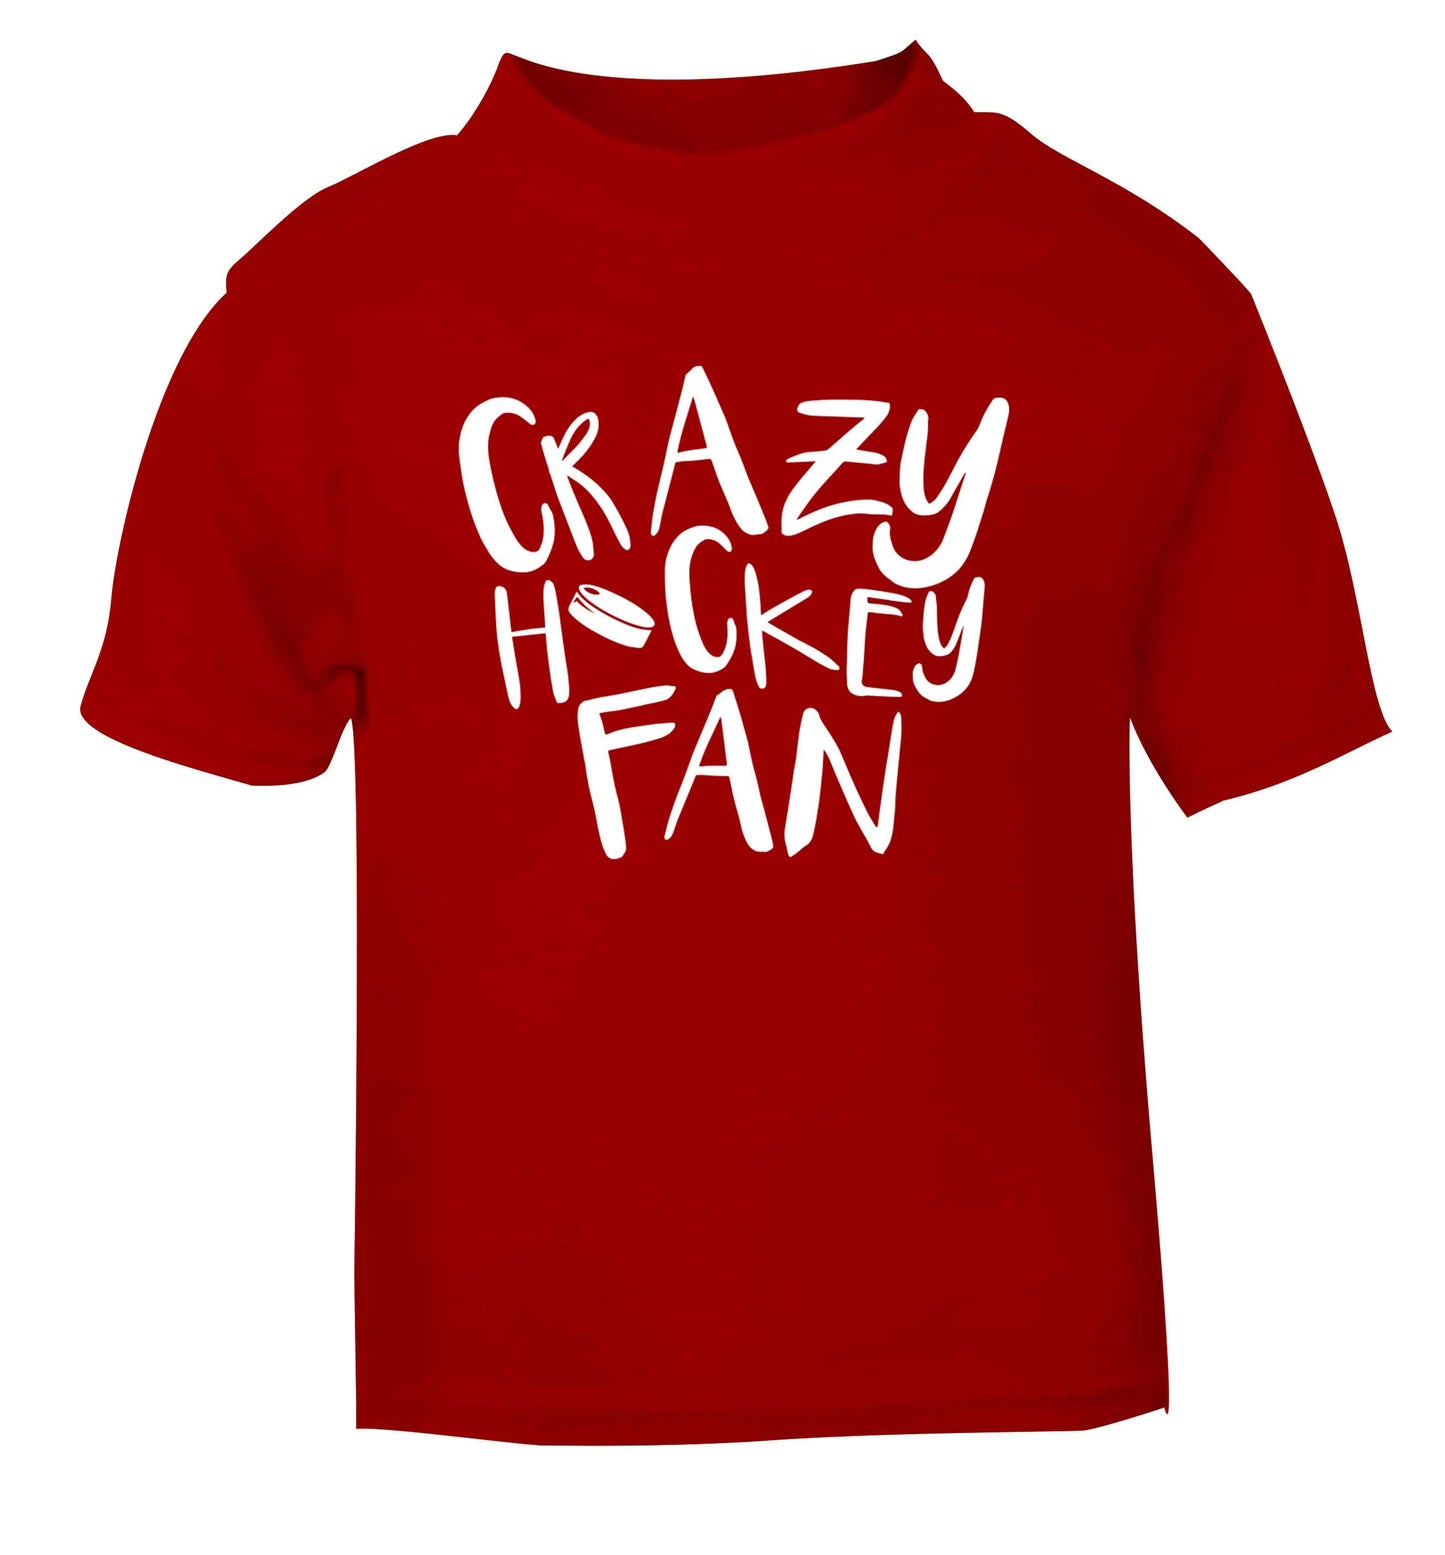 Crazy hockey fan red Baby Toddler Tshirt 2 Years